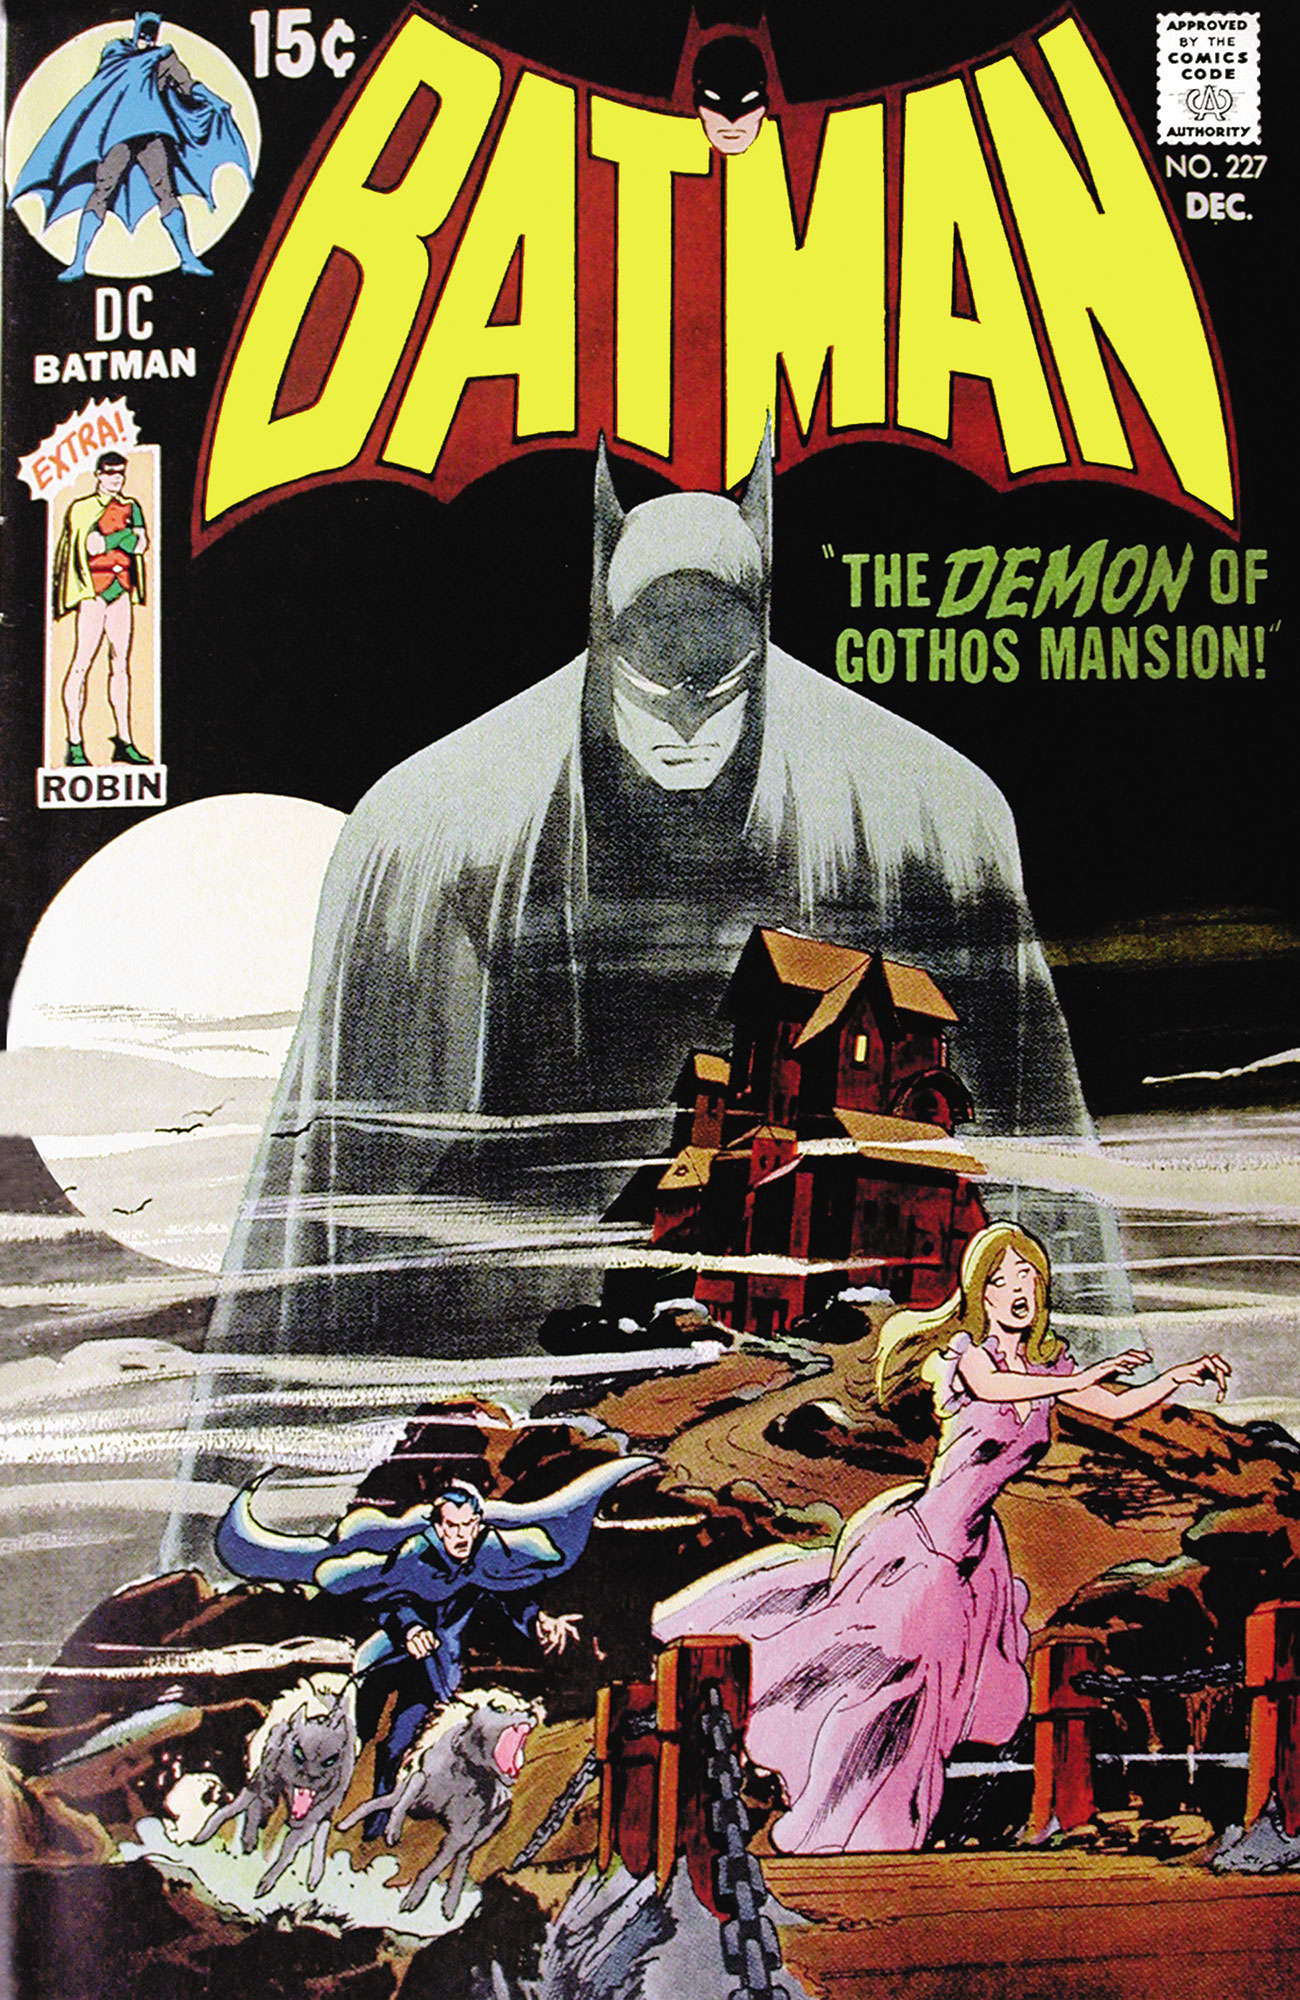 The Top Ten Batman Covers from Each Era (Part 3 – The Bronze Age